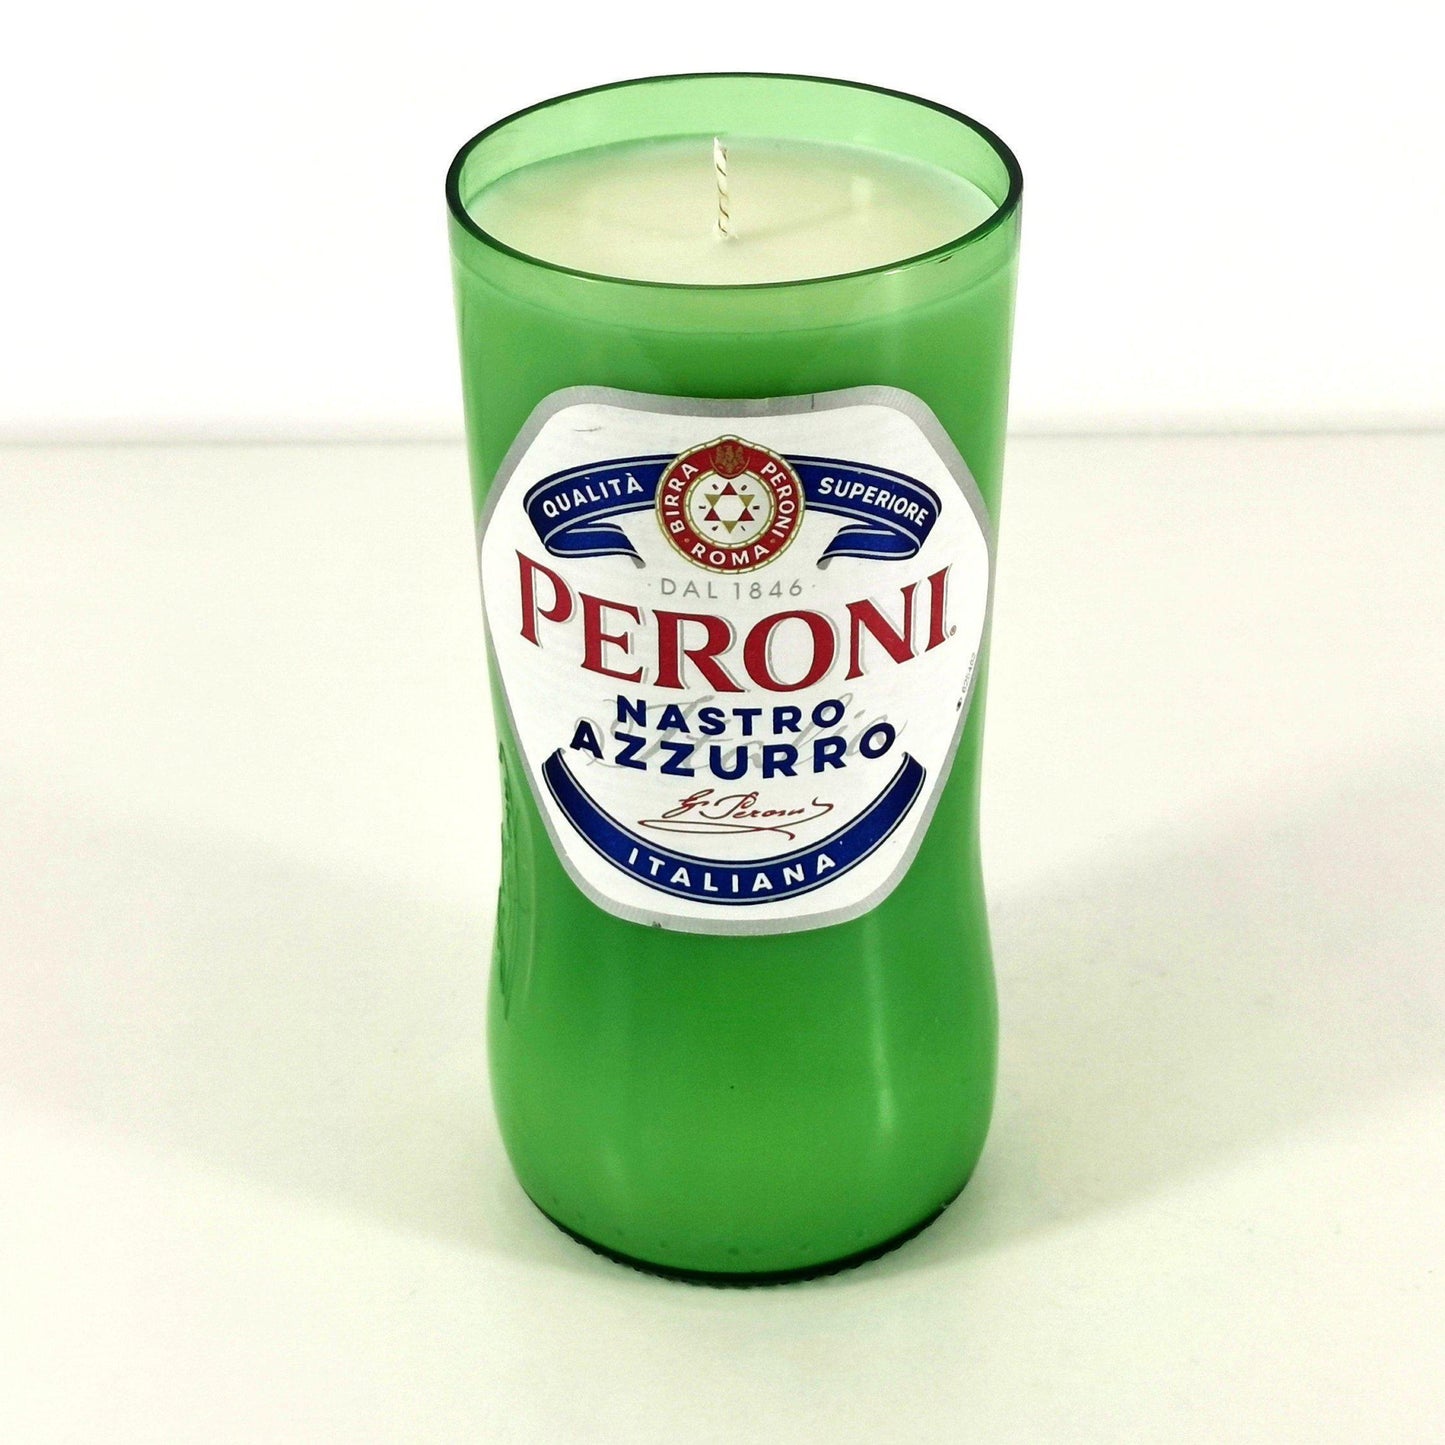 Peroni Small Beer Bottle Candle Beer & Ale Bottle Candles Adhock Homeware